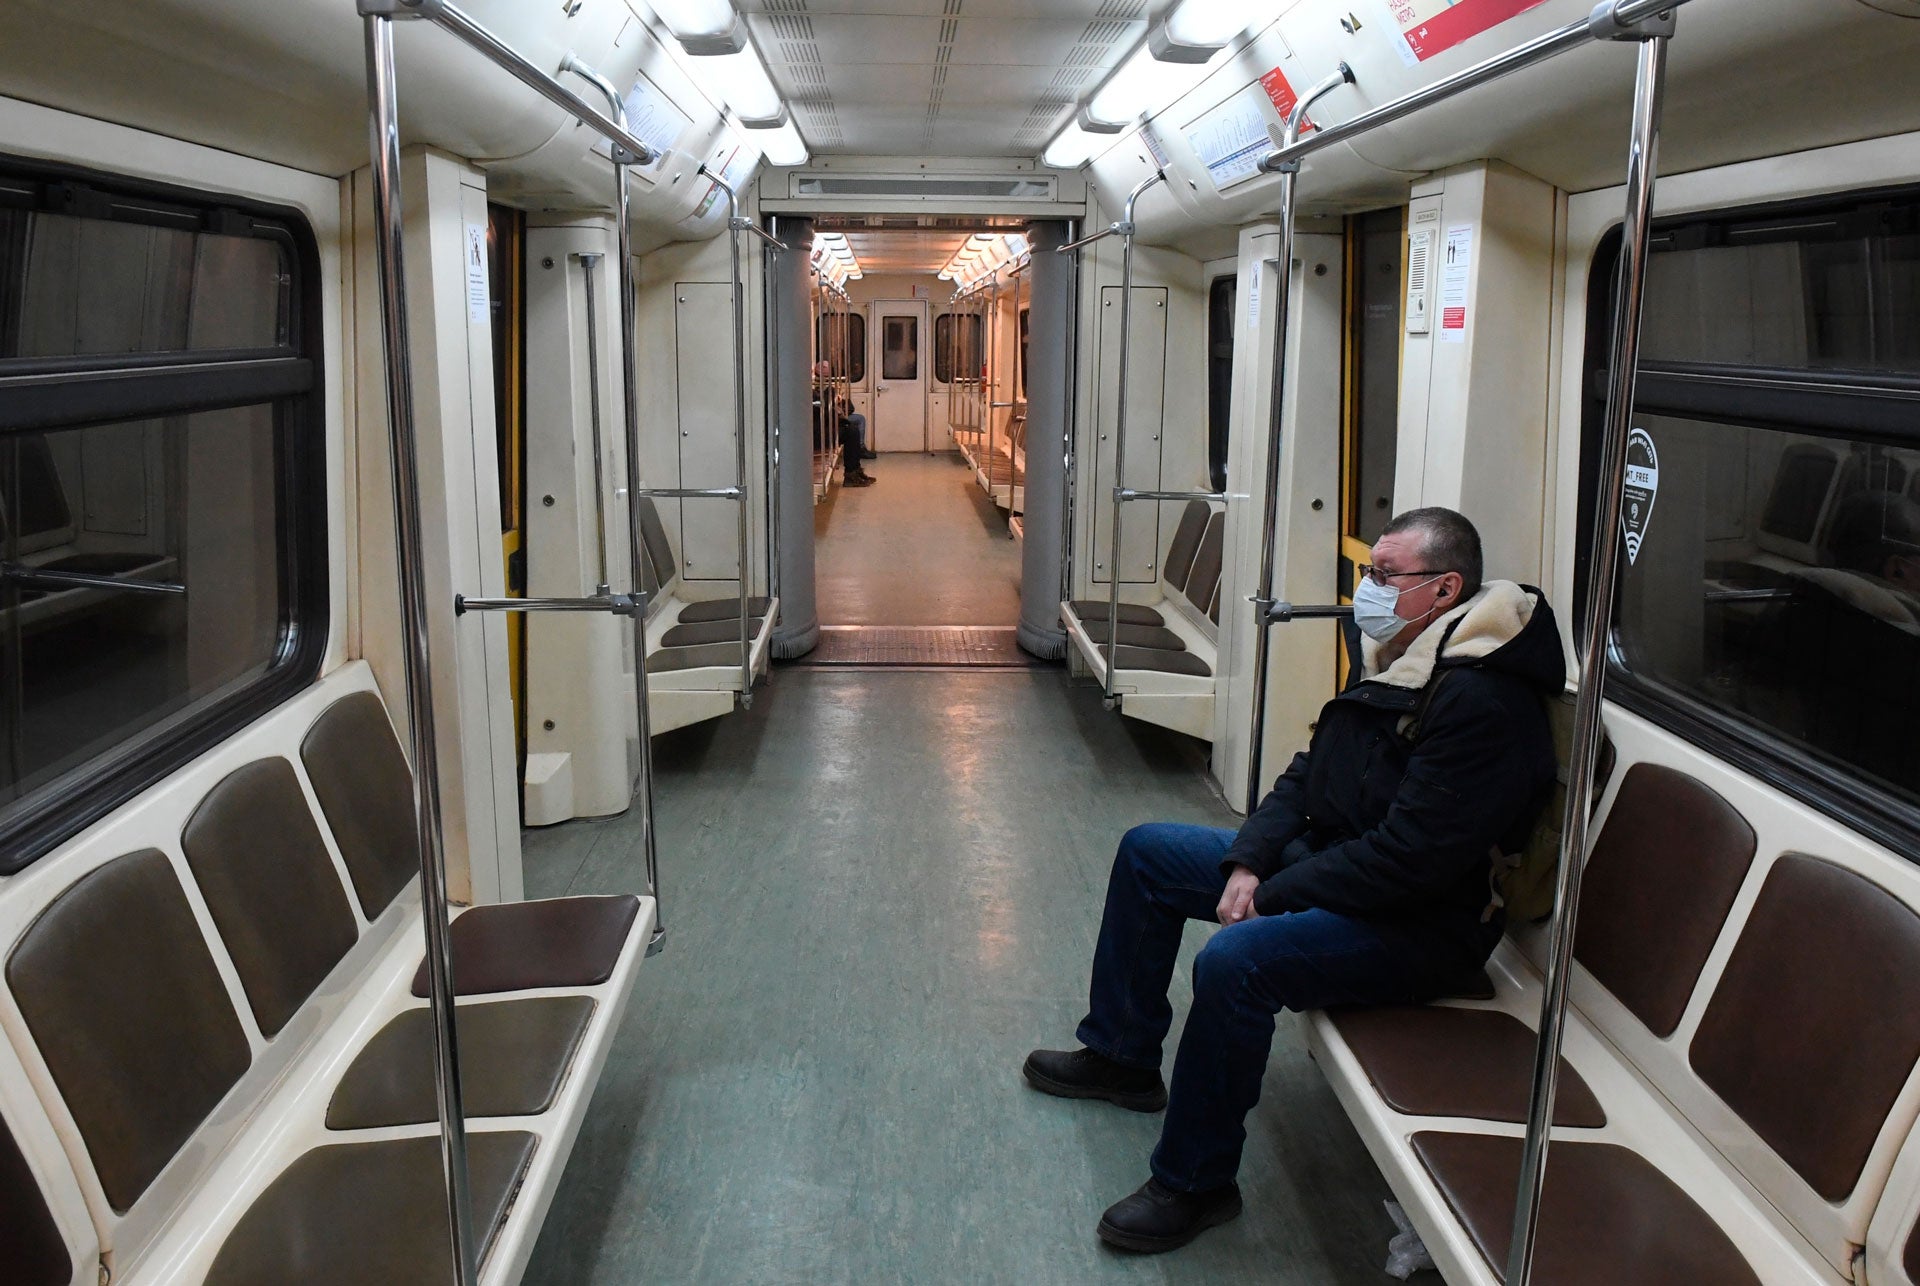 A man wearing a protective face mask rides an empty train on the Moscow Metro, Russia, March 30, 2020.